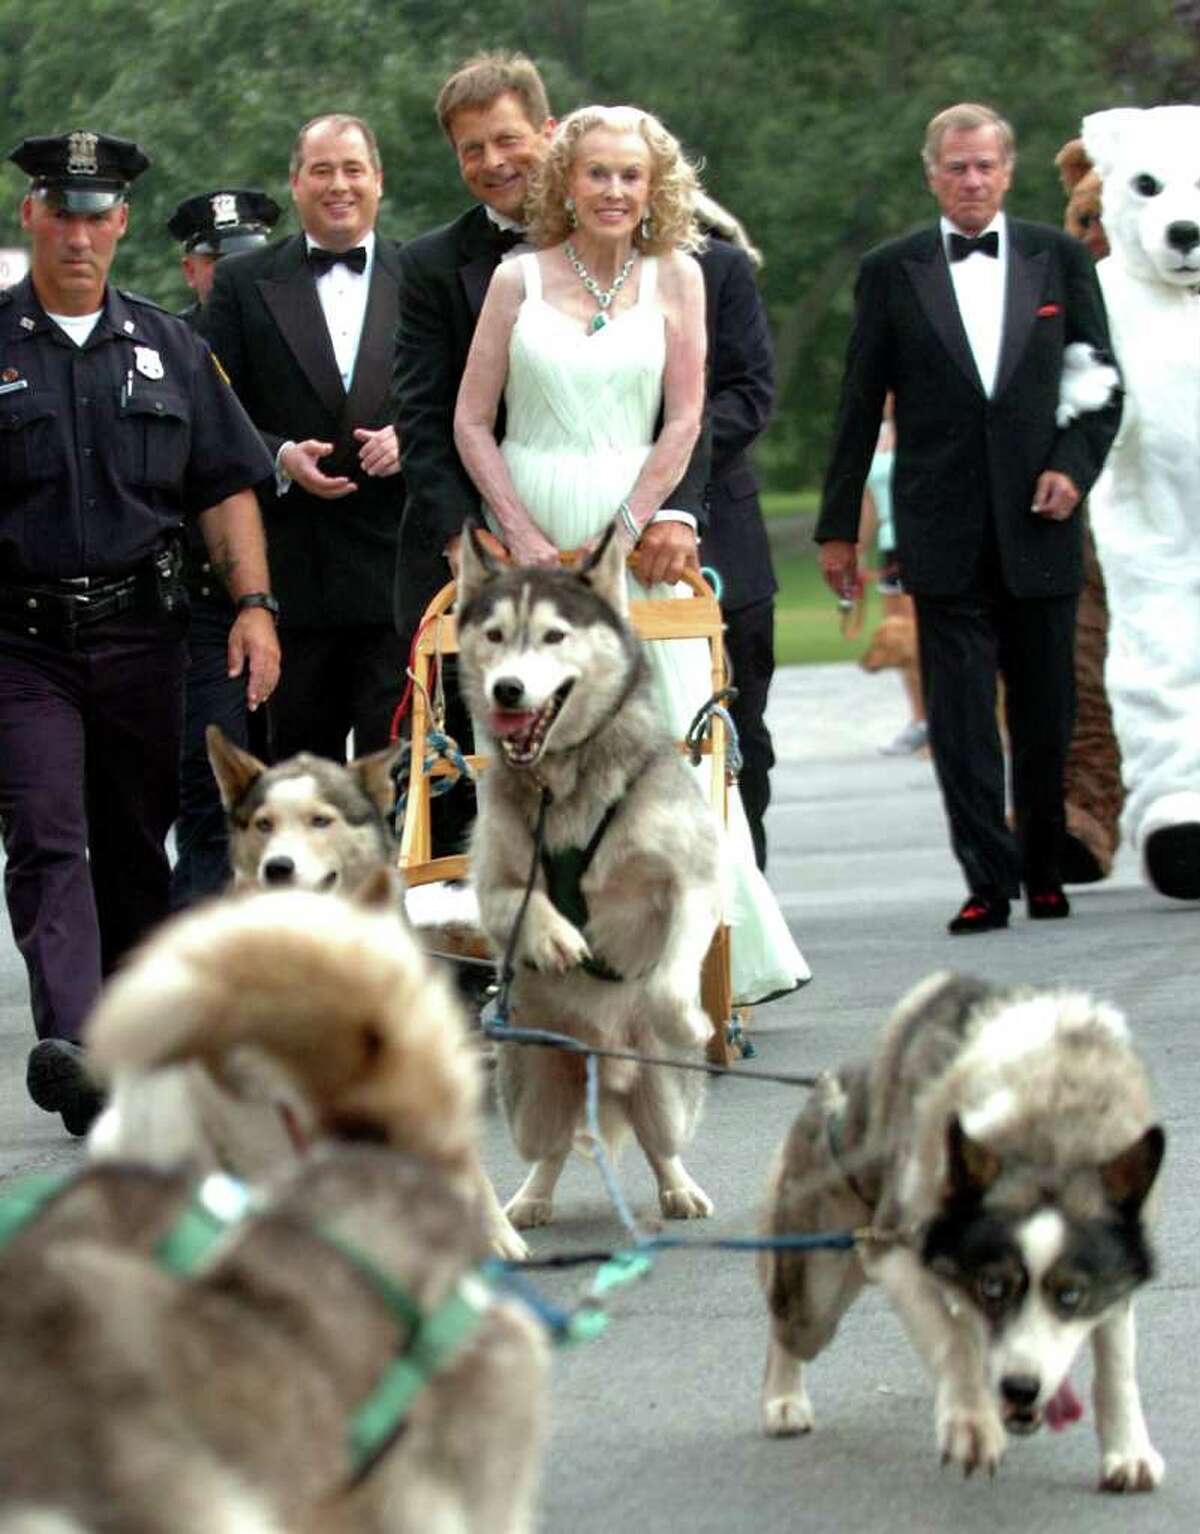  Socialite Marylou Whitney, center right, arrives at her gala "A Night in Alaska" on a dog sled with Iditarod musher Martin Buser, center left, on Friday Aug. 3, 2007, at the Canfield Casino in Saratoga Springs, N.Y. At left is Whitney's husband John Hendrickson. 